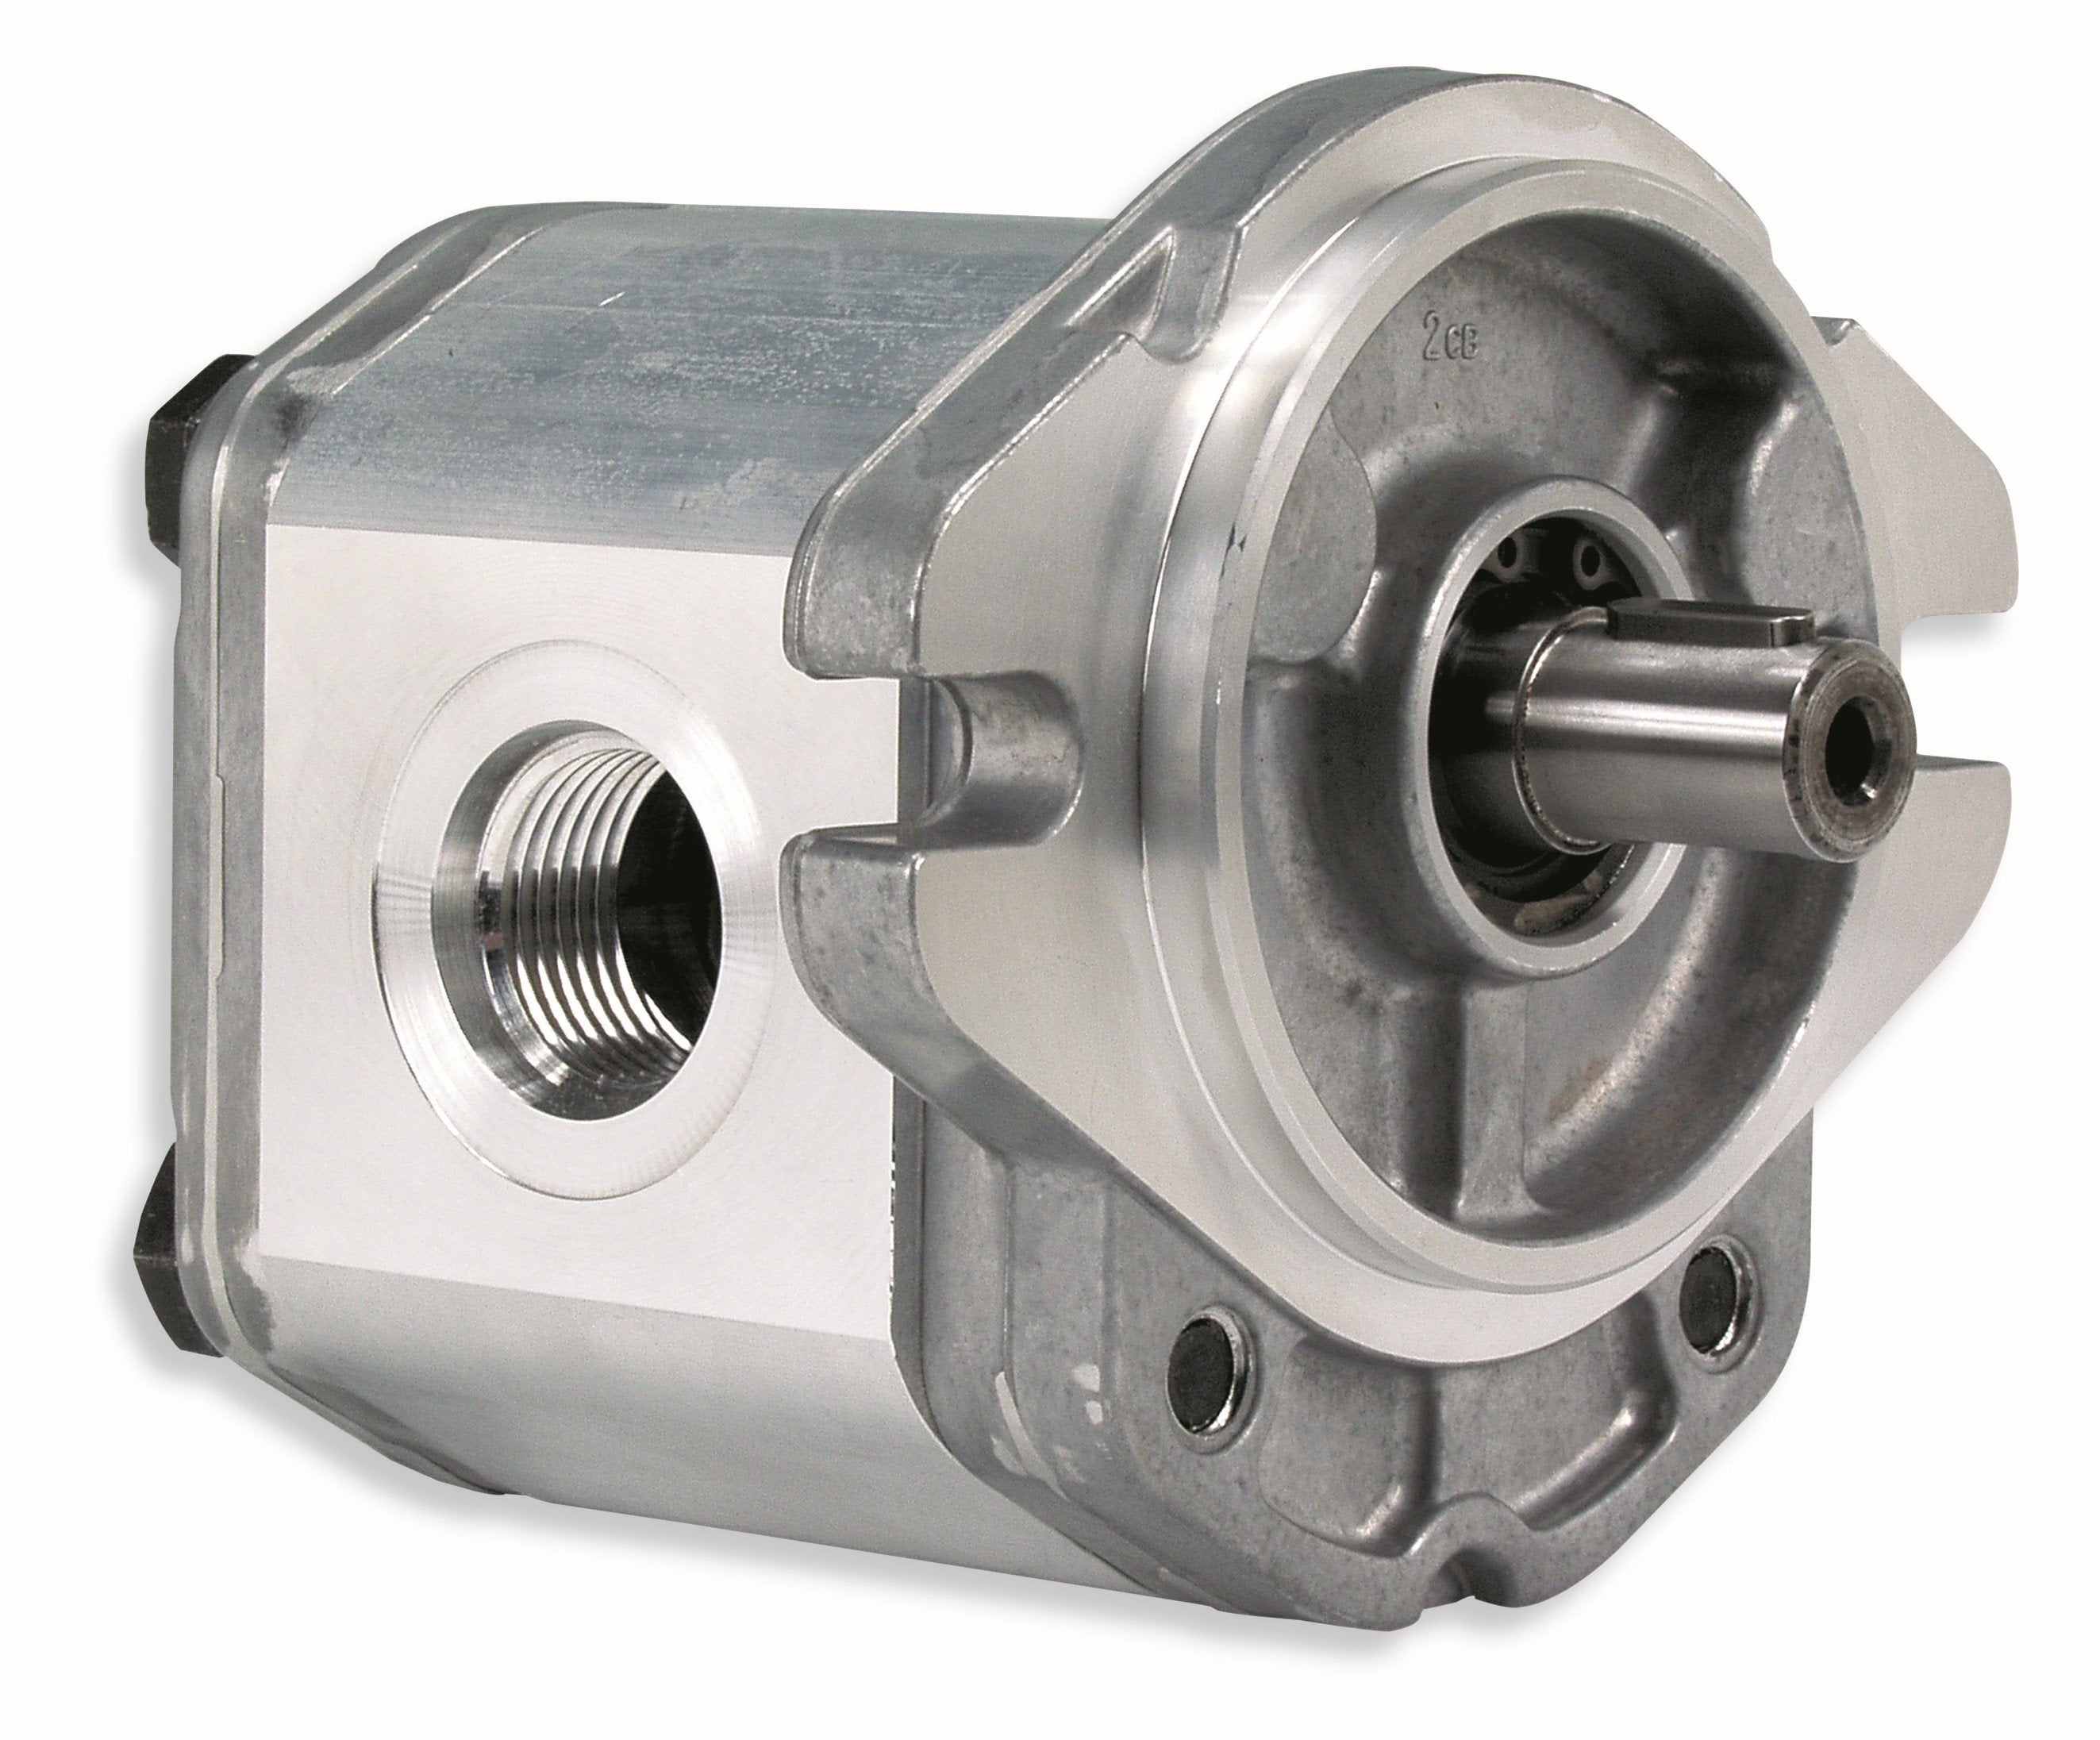 GHM3A-R-120-S1-FA-E4 : Marzocchi Gear Motor, Bidirectional, 78cc, 2610psi rated, 2300RPM, 1.5" #24 SAE ports, 13T 16/32DP Splined Shaft